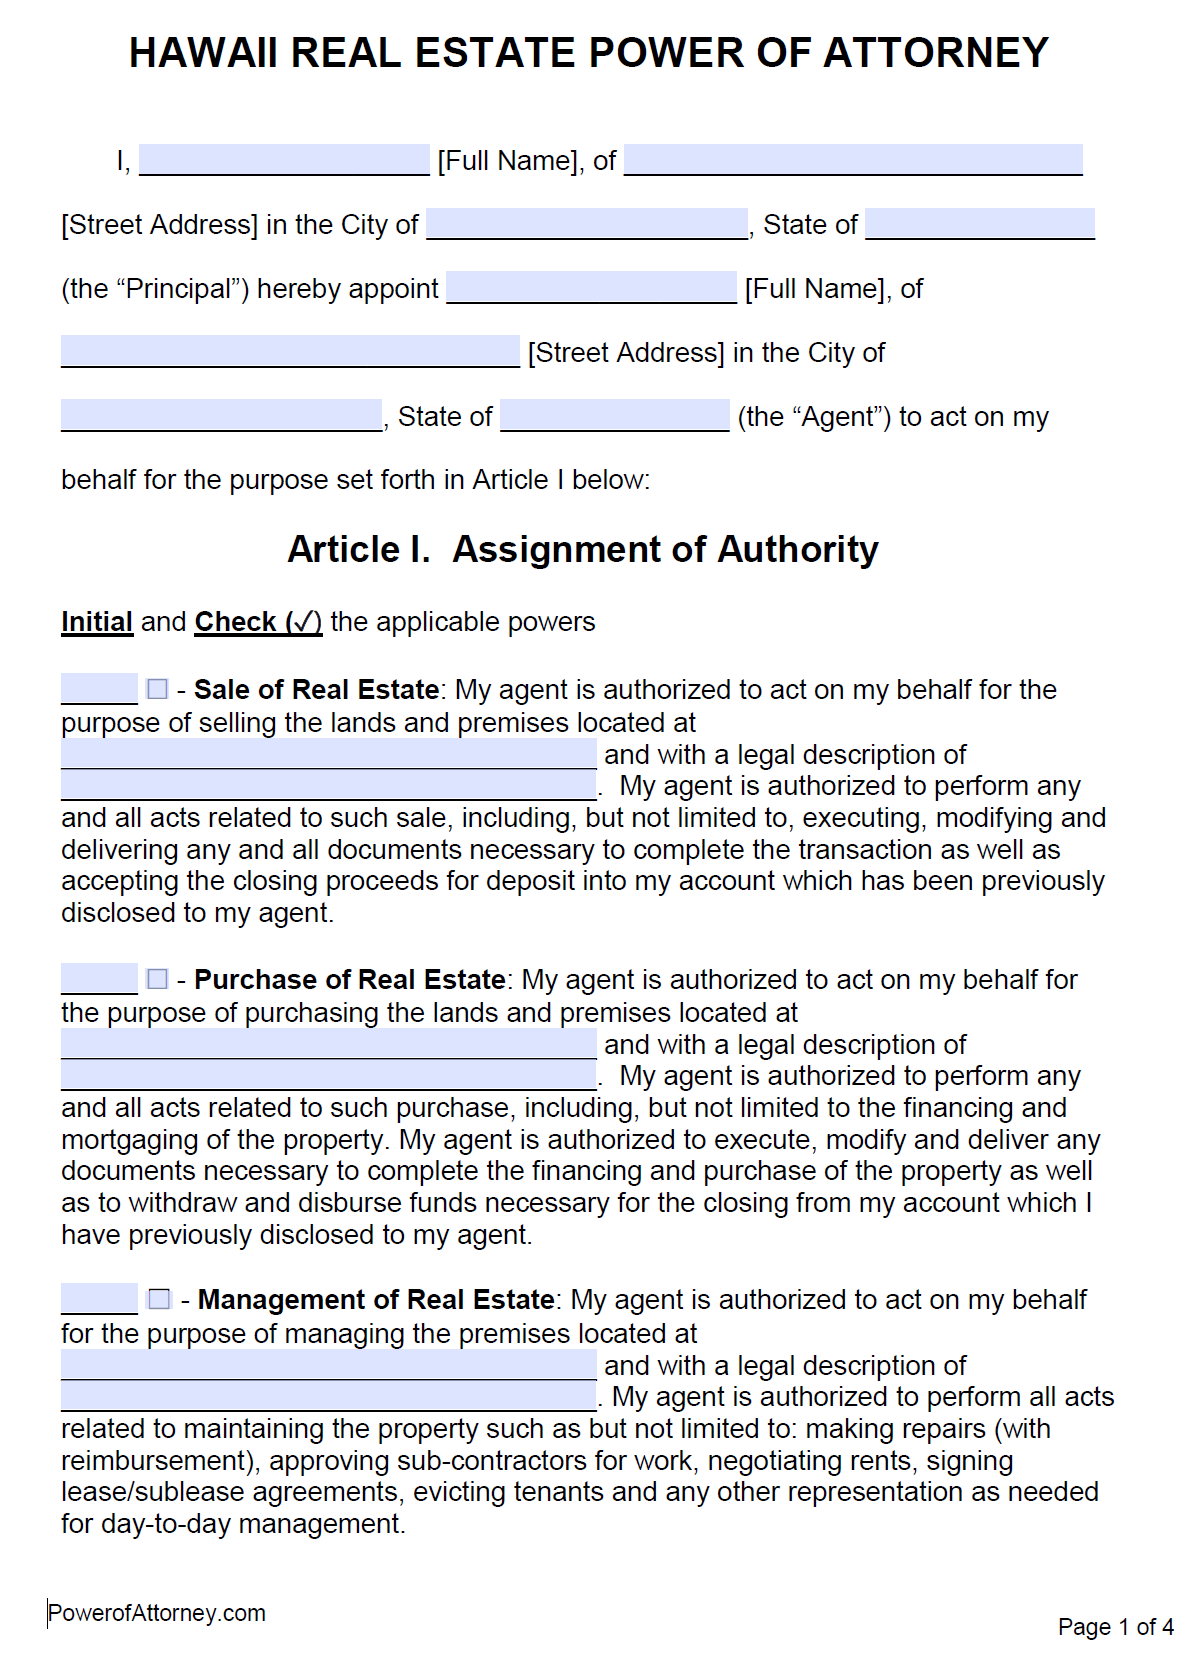 Free Hawaii Power Of Attorney Forms